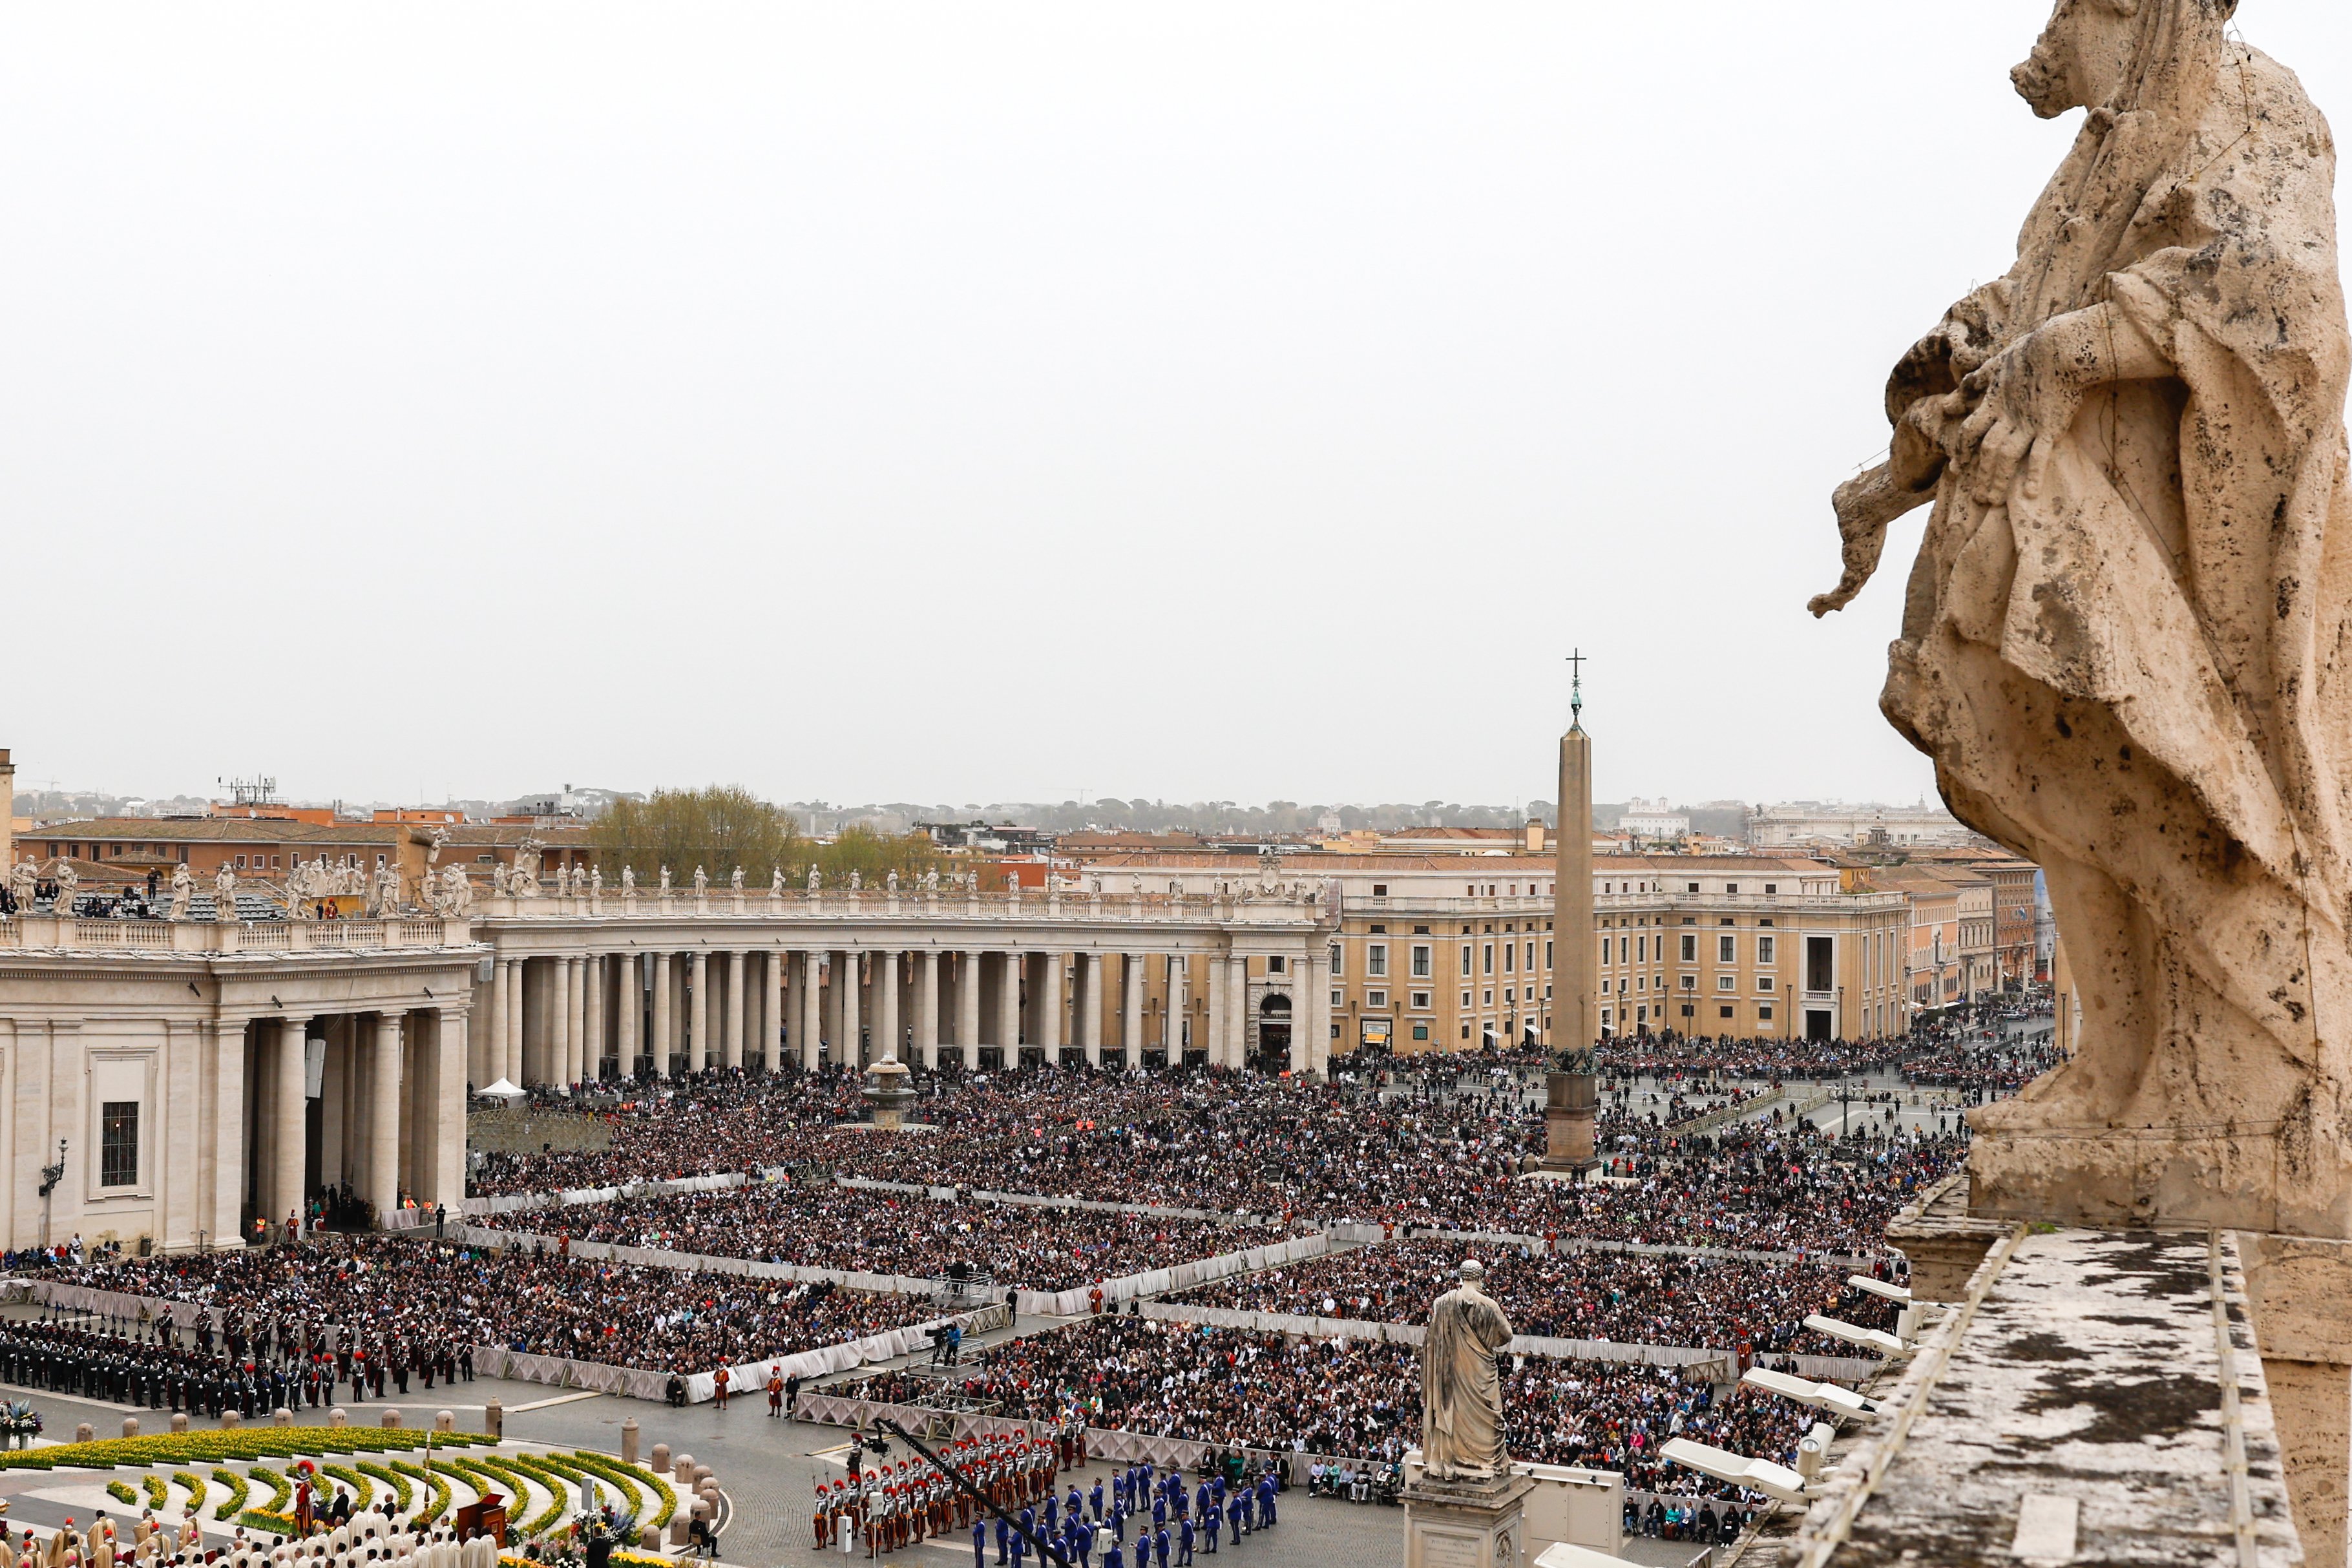 A crowd gathers in St. Peter's Square.